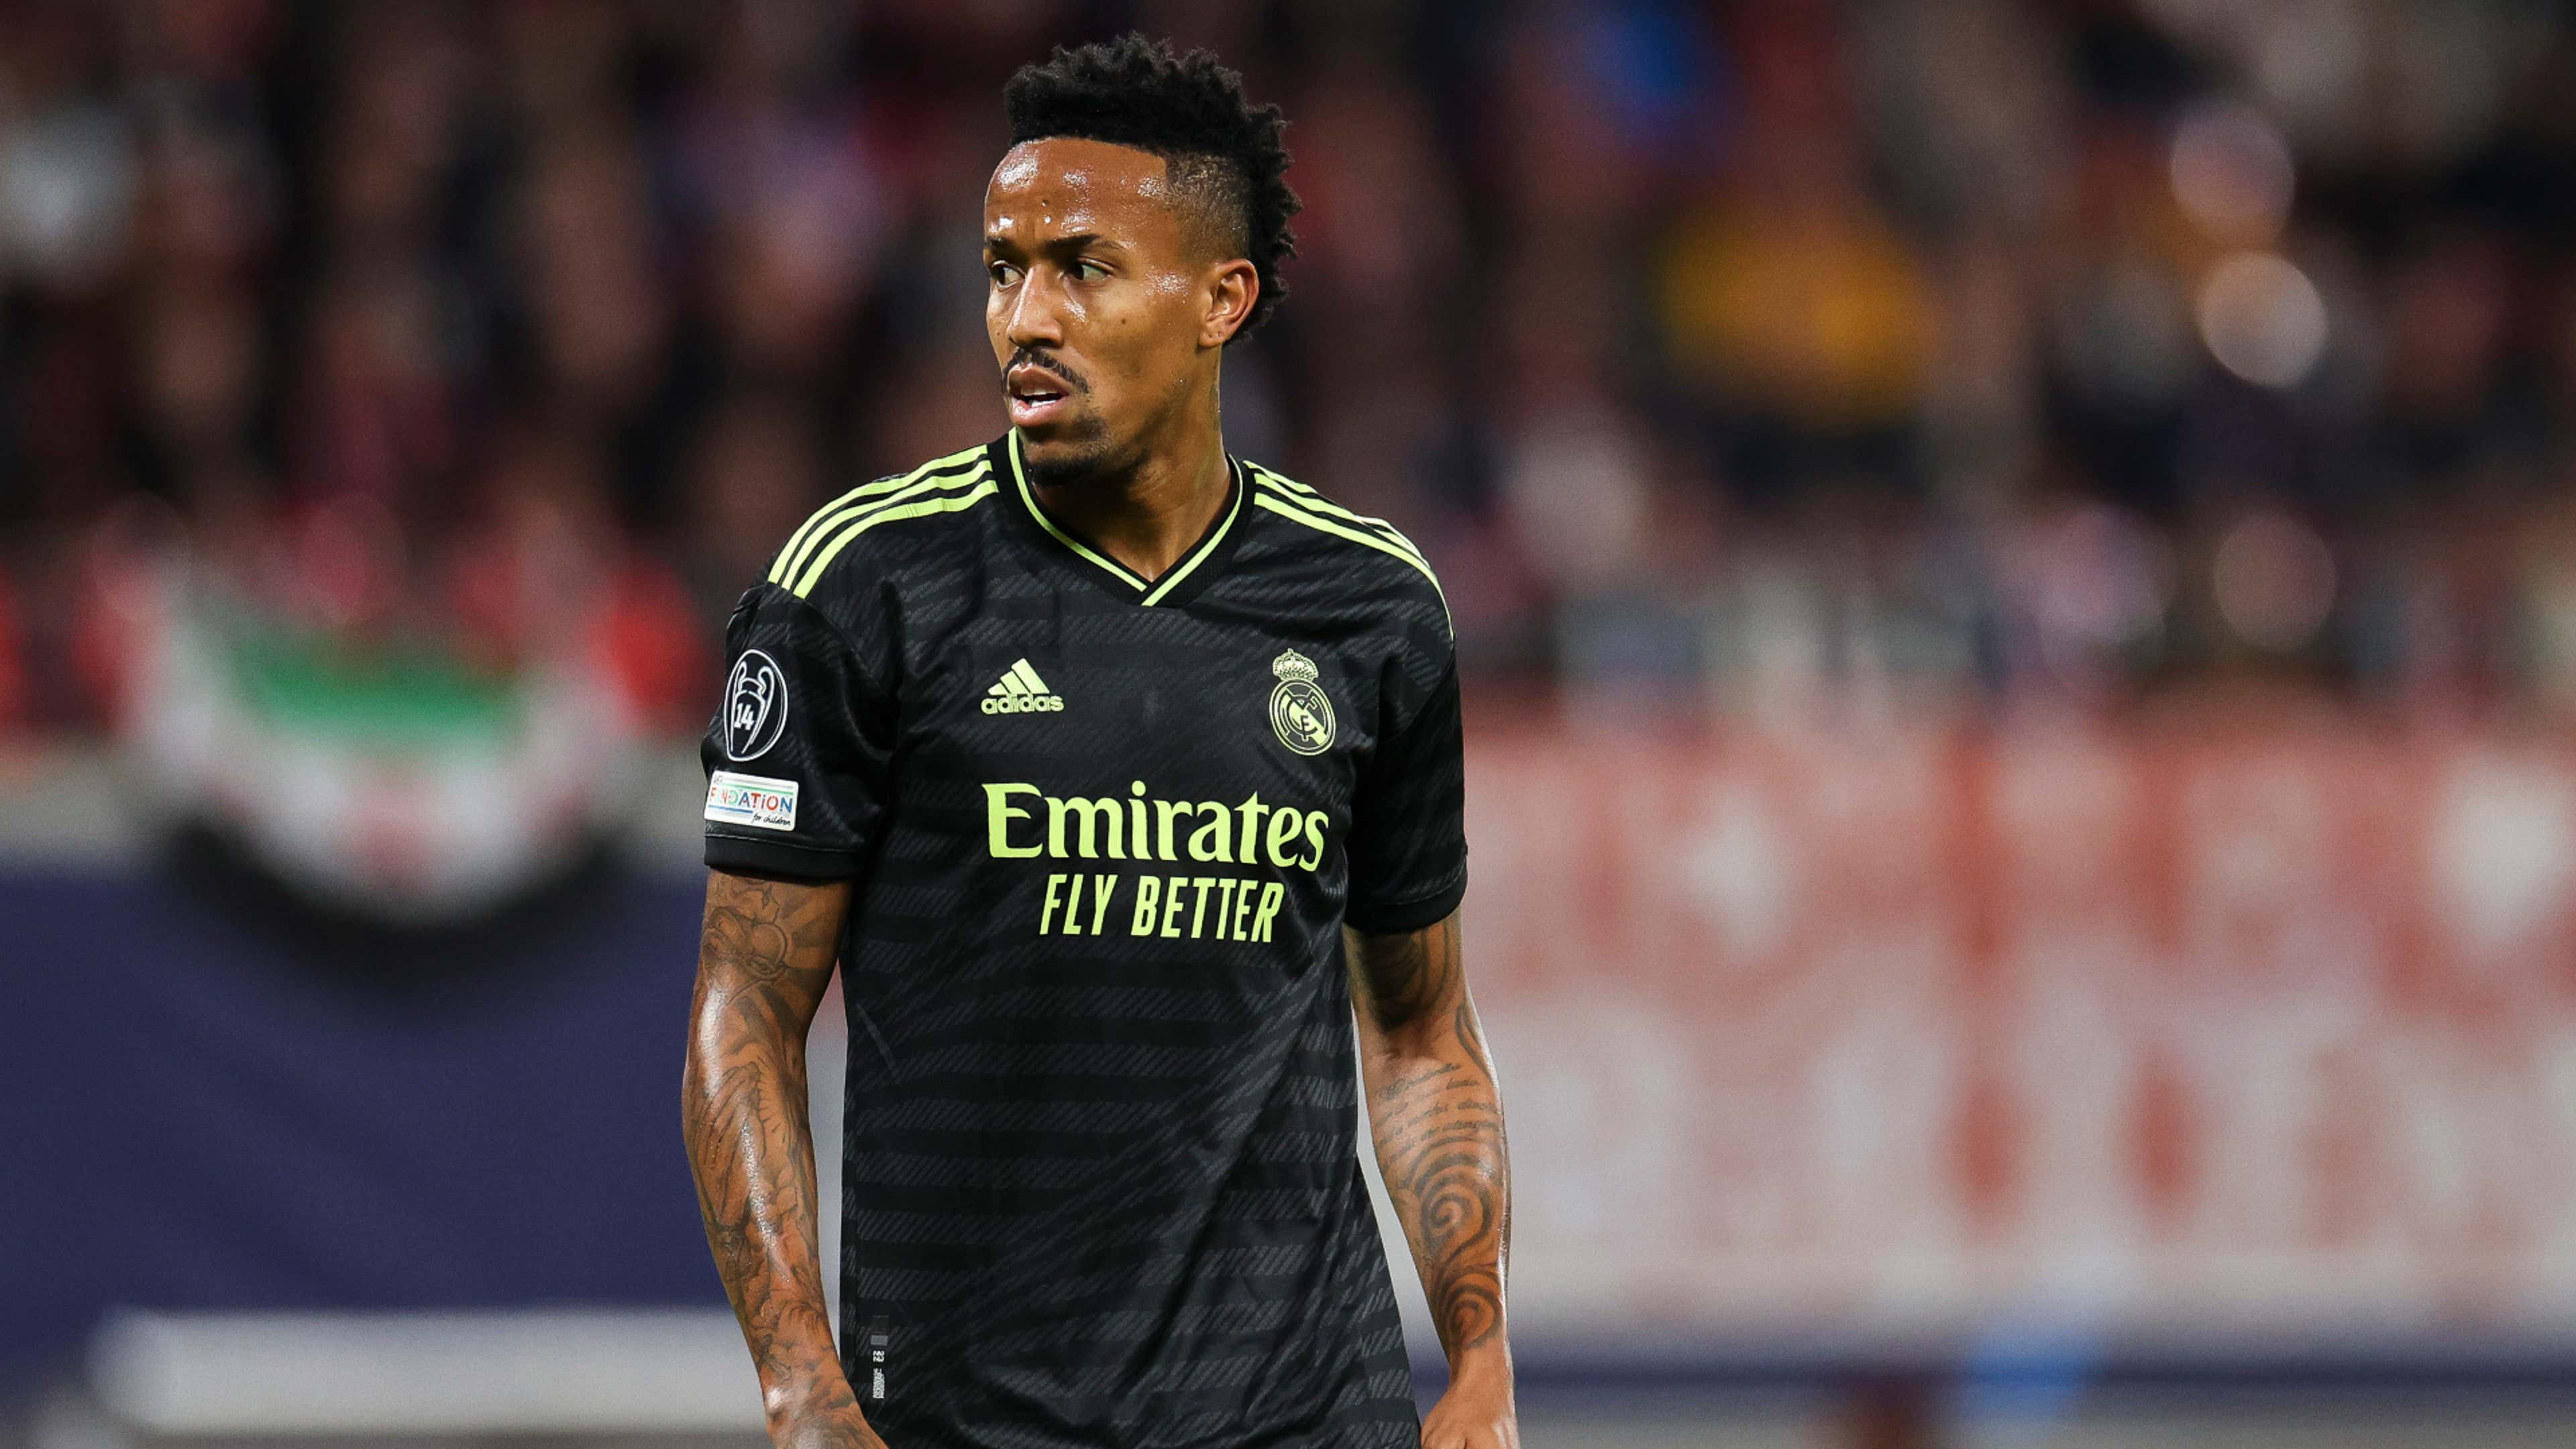 He has to wake up!' - Real Madrid defender Eder Militao slammed by Carlo  Ancelotti after basic error in Real Sociedad loss | Goal.com UK